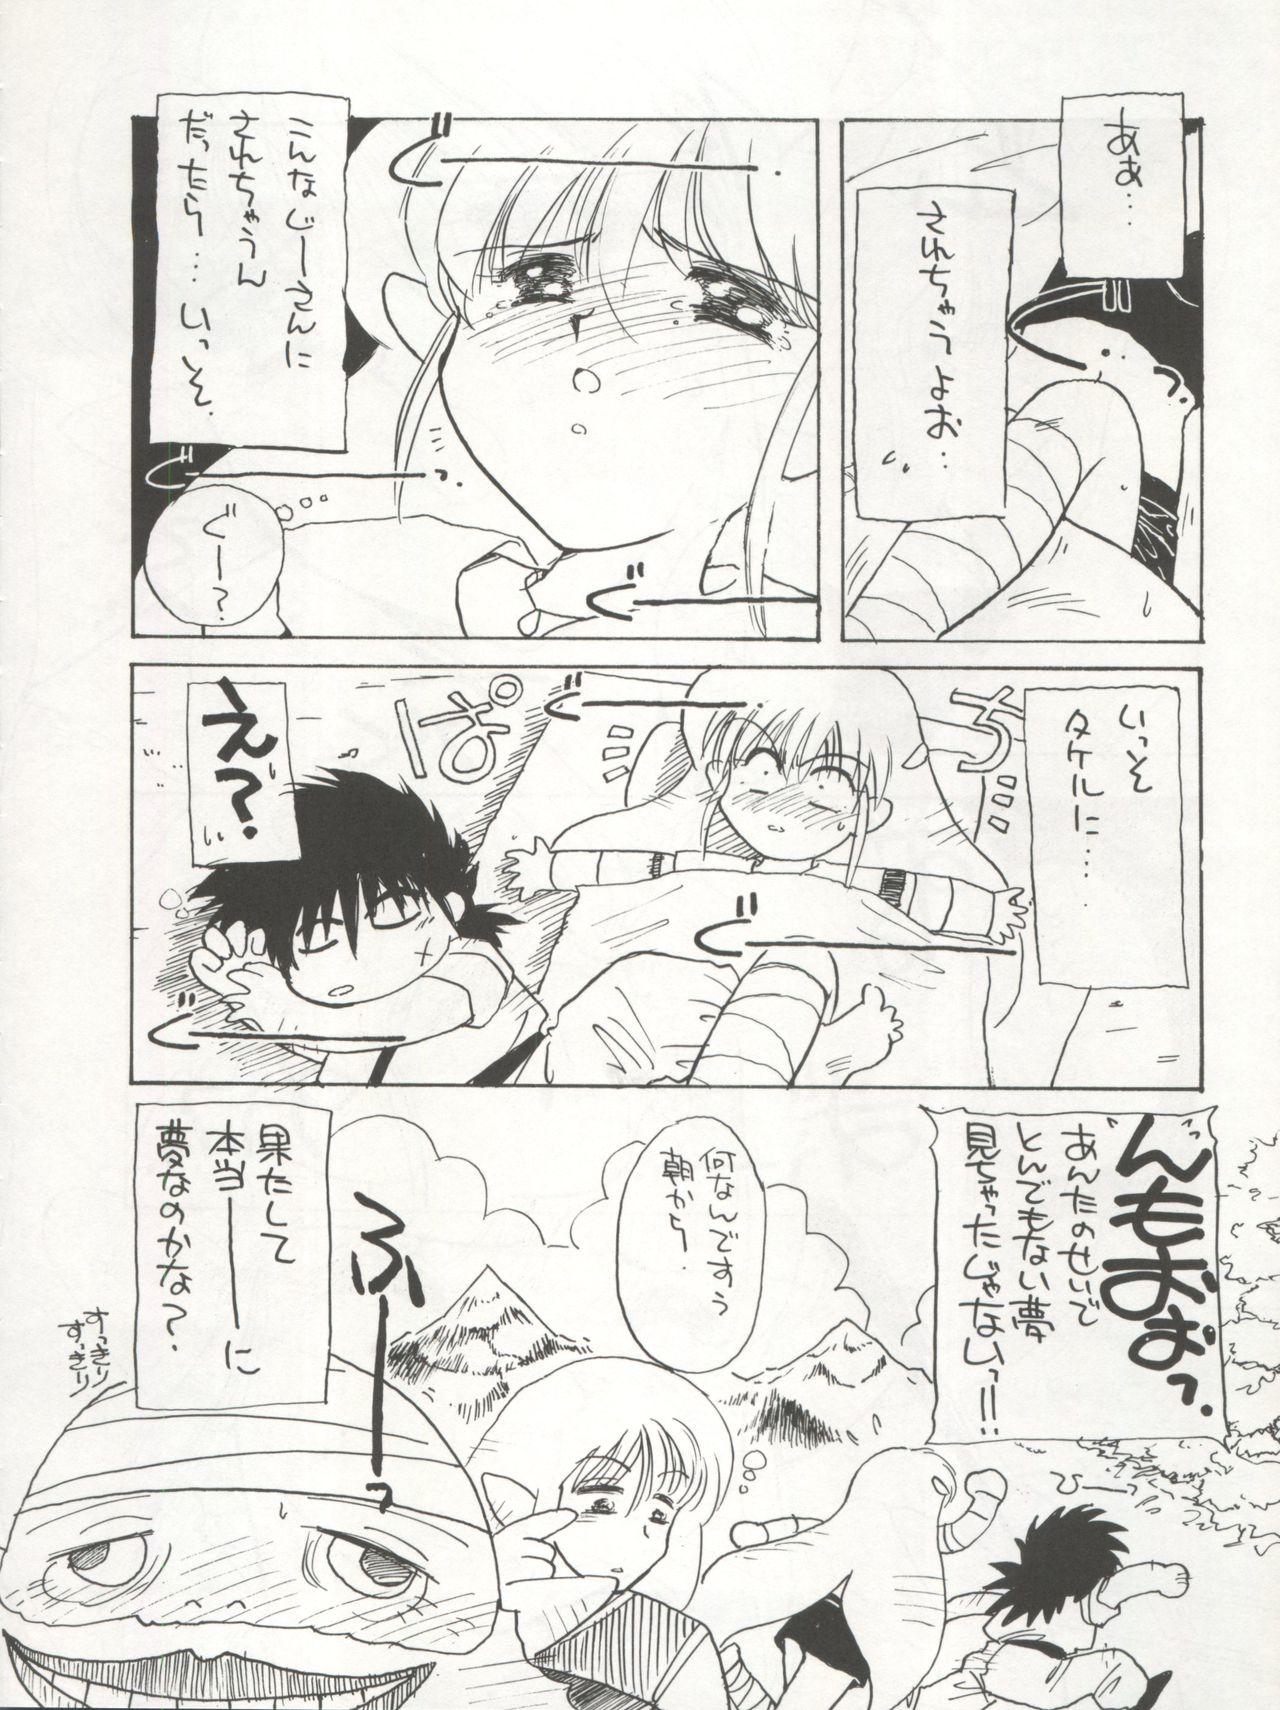 Deflowered GIRL IN THE BOX - Marmalade boy Swallowing - Page 12